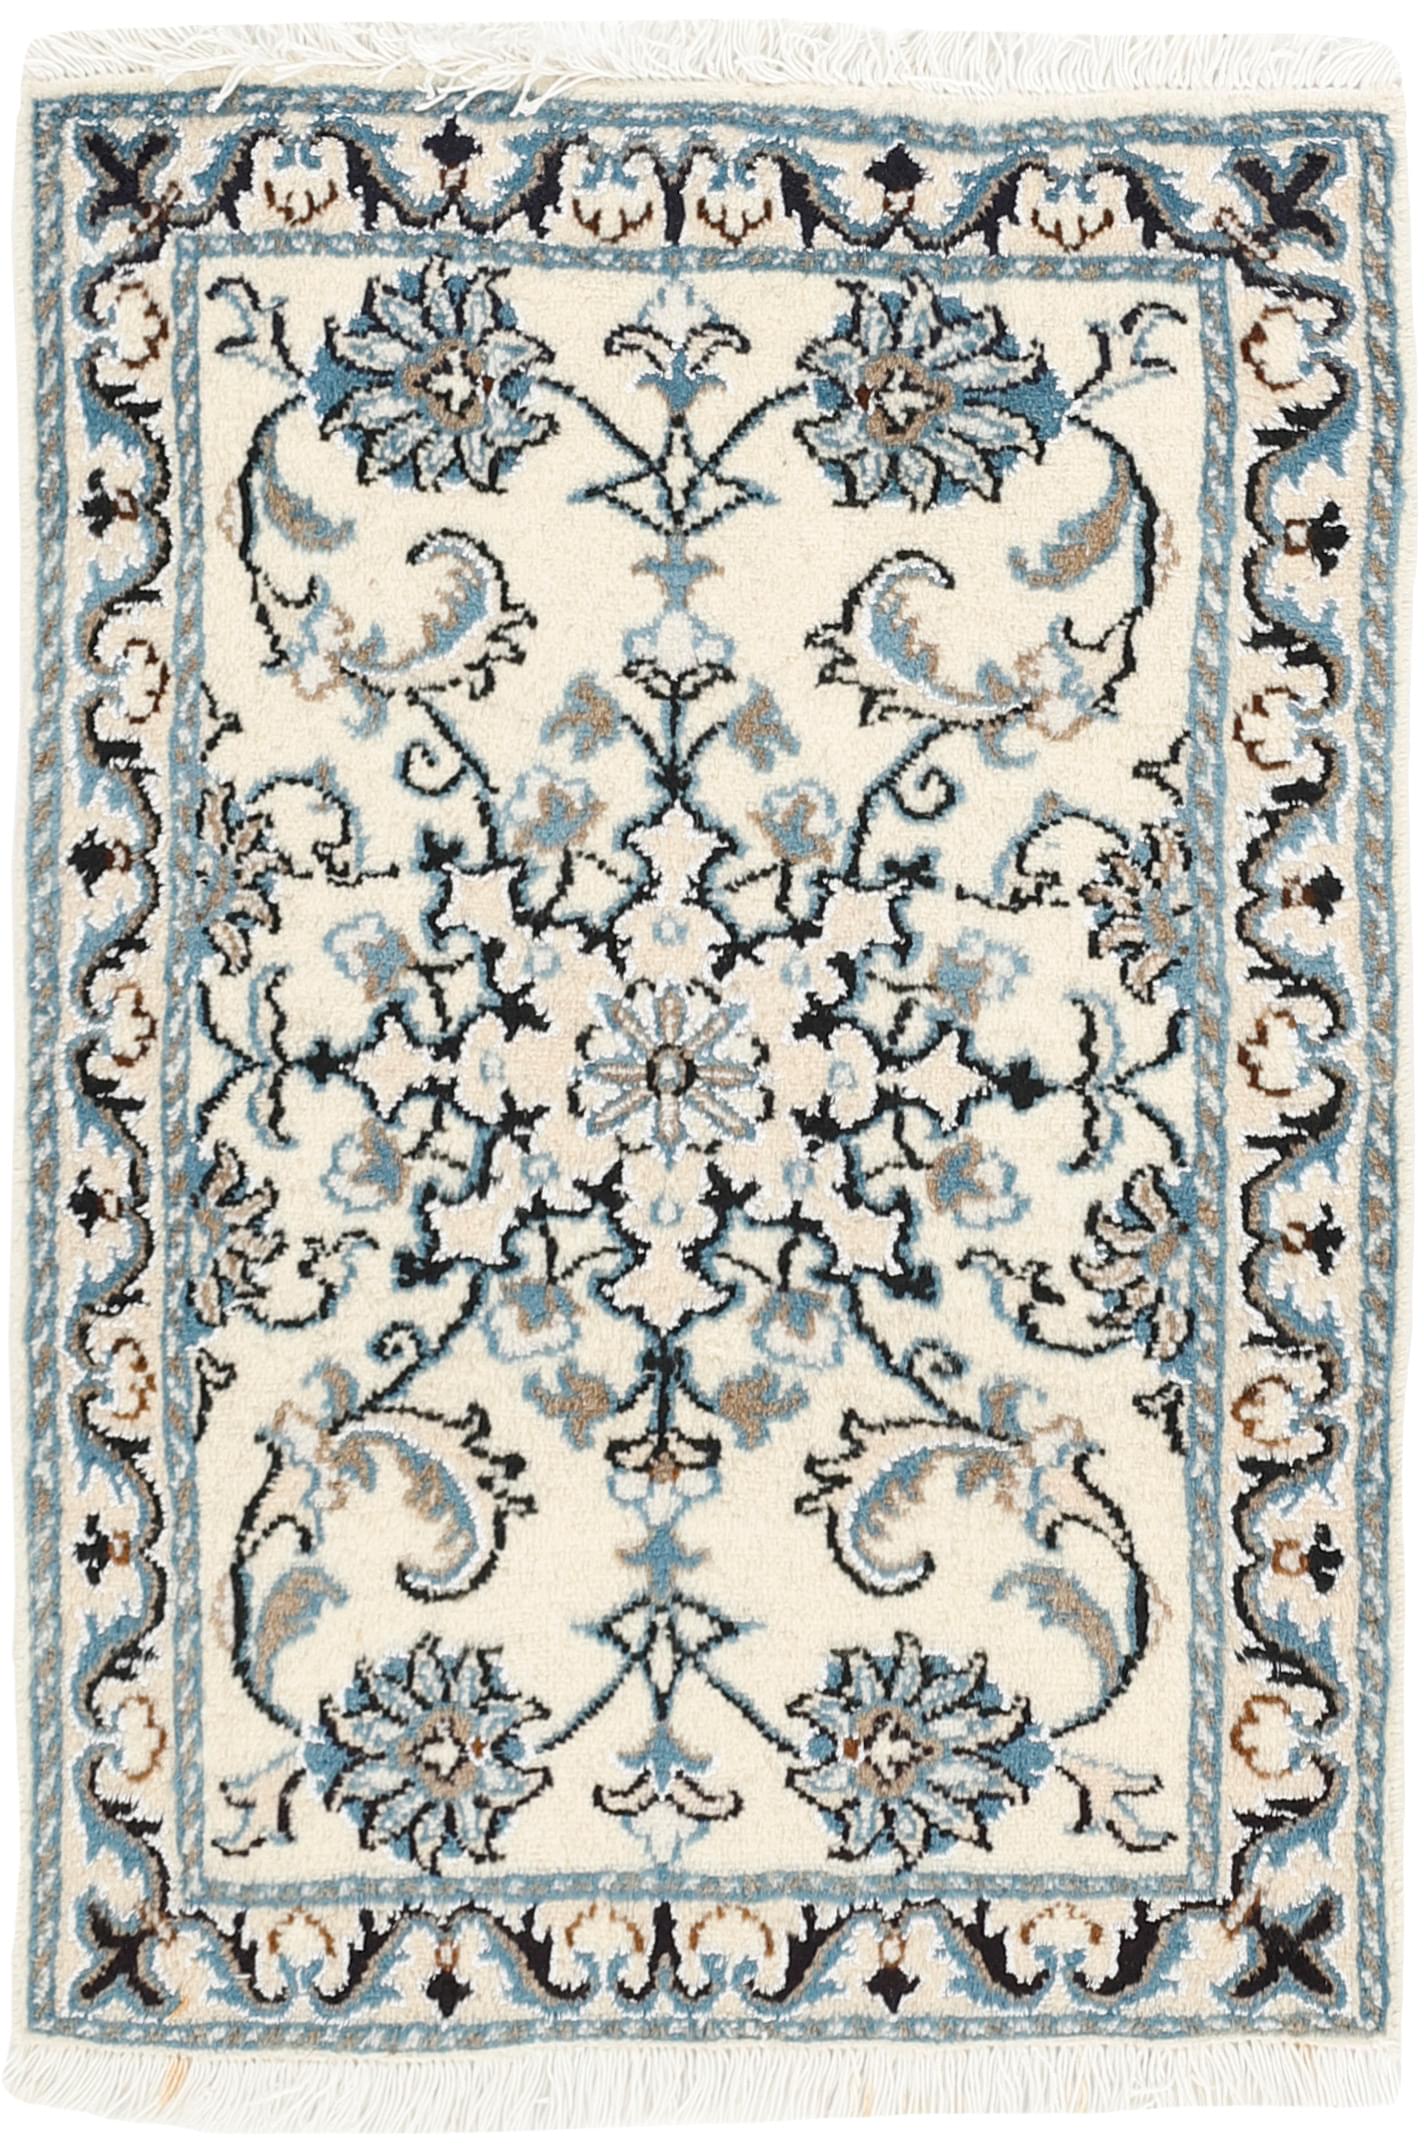 Authentic persian rug with a traditional floral design in cream and blue